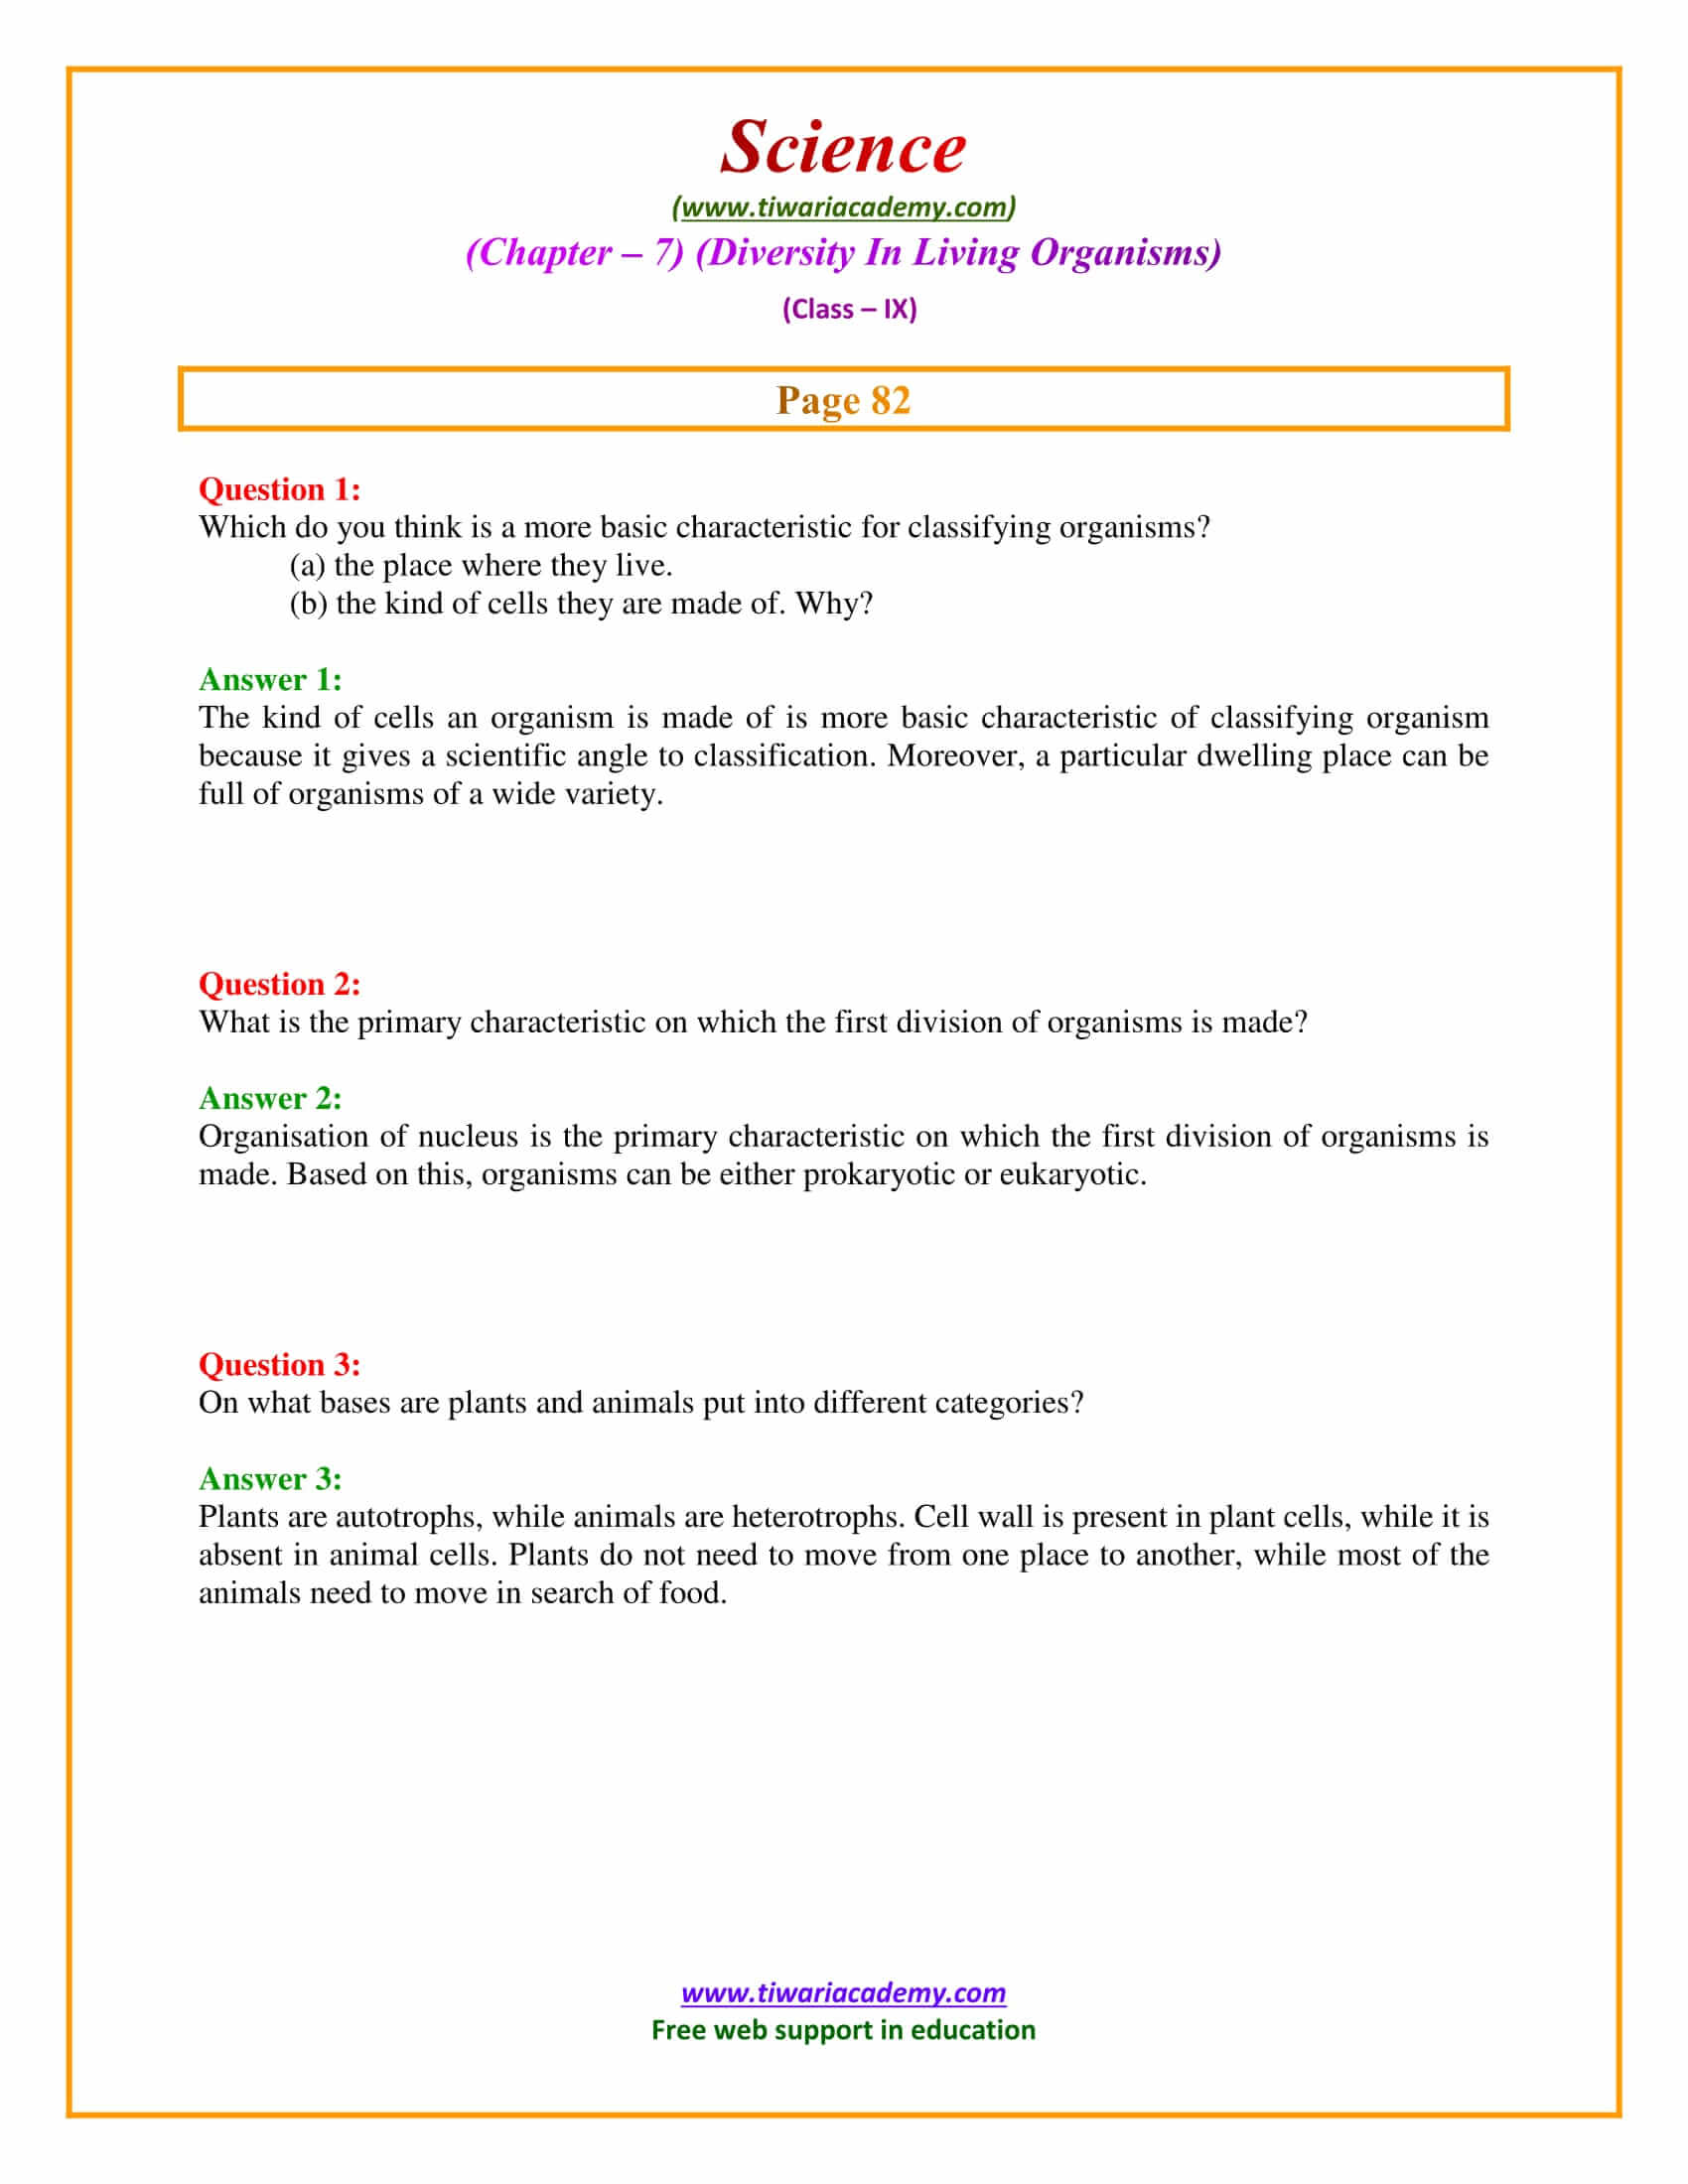 NCERT Solutions for Class 9 Science Chapter 7 Diversity in Living Organisms Intext questions page 82